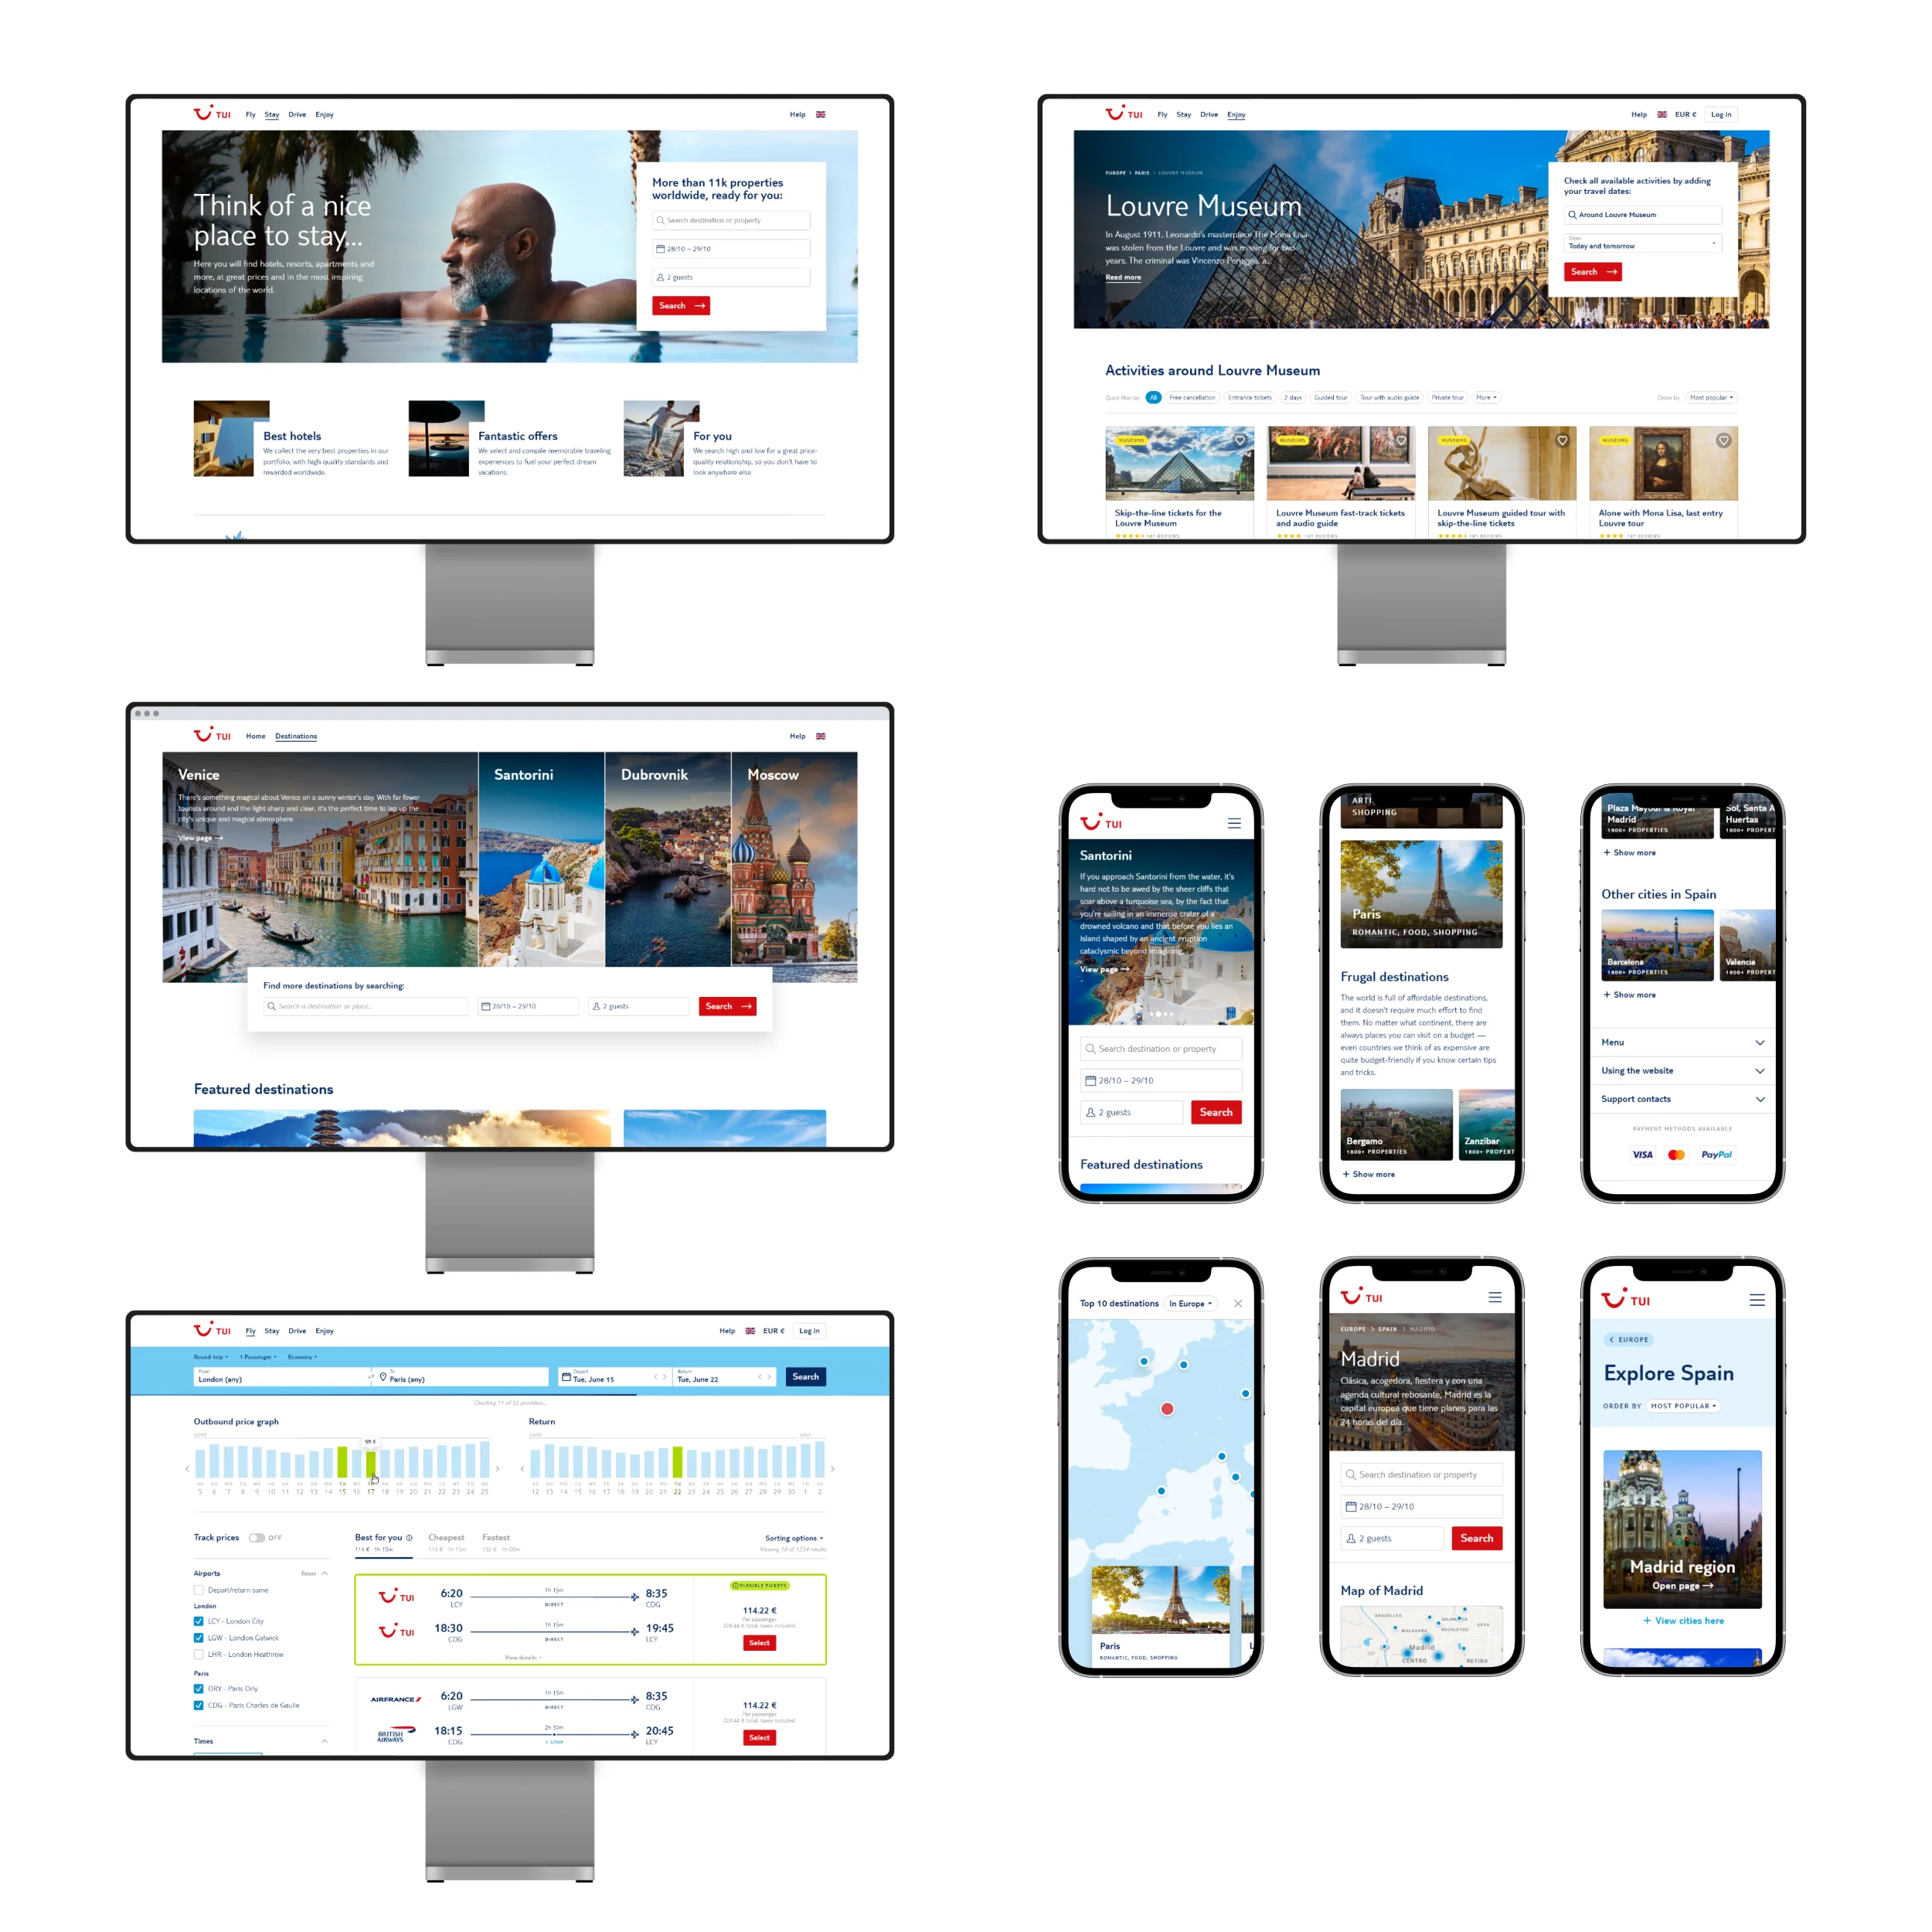 Collection of mockups arranged in a grid format, comprising web app screenshots framed in desktop computer screens and smartphone devices.